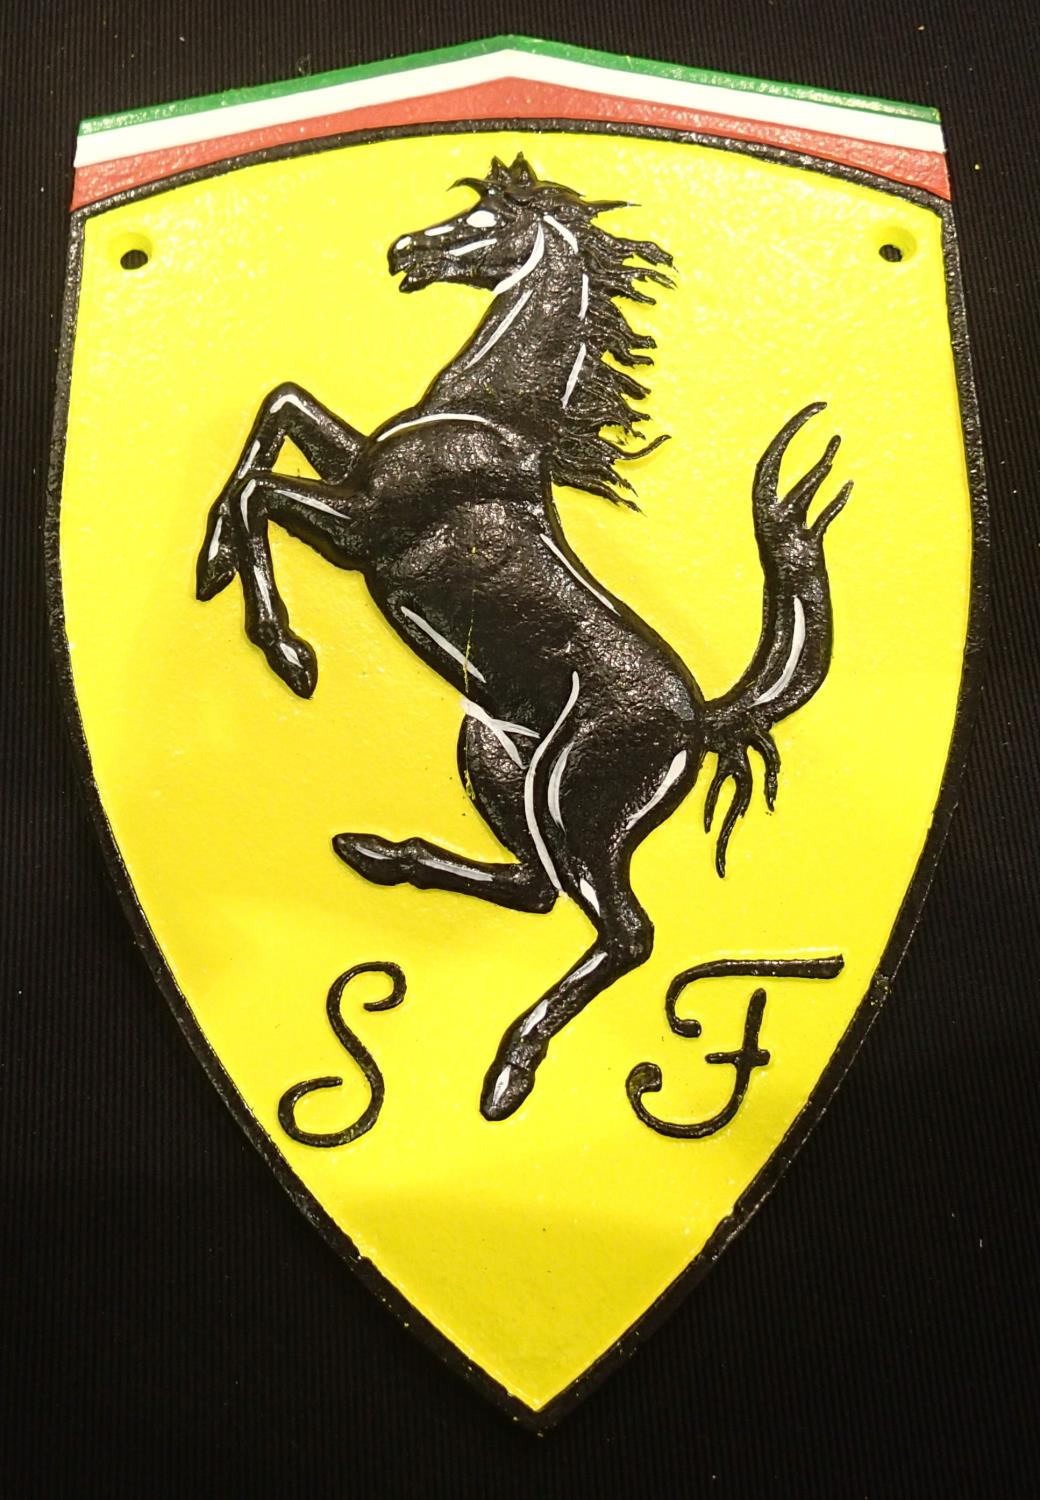 A cast iron Ferrari badge wall plaque, 20 x 30 cm. P&P Group 2 (£18+VAT for the first lot and £3+VAT